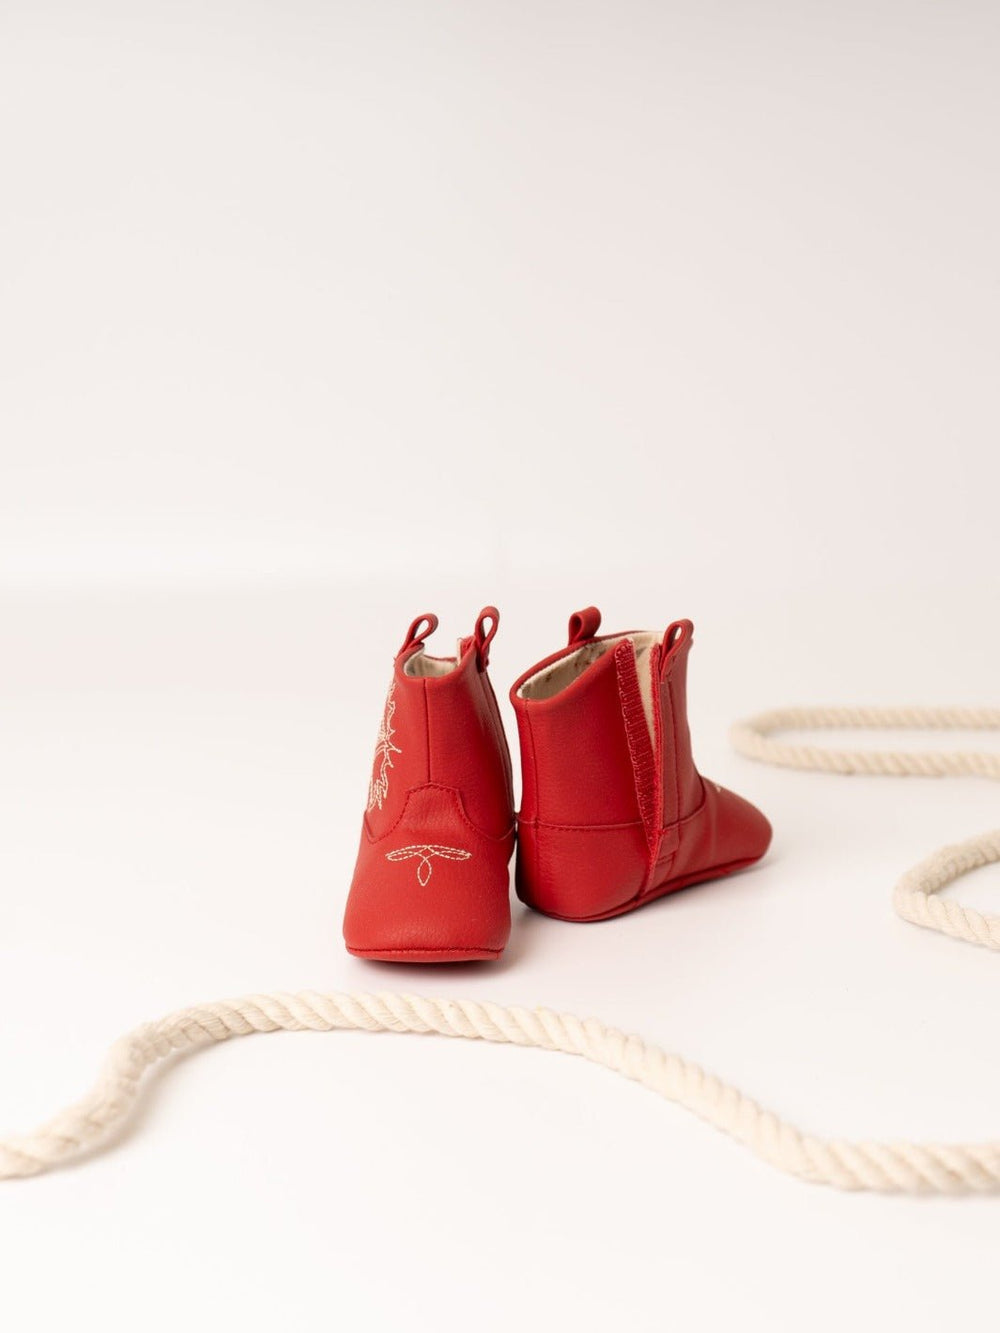 Baby Western Boots - Cherry Red - Heyday